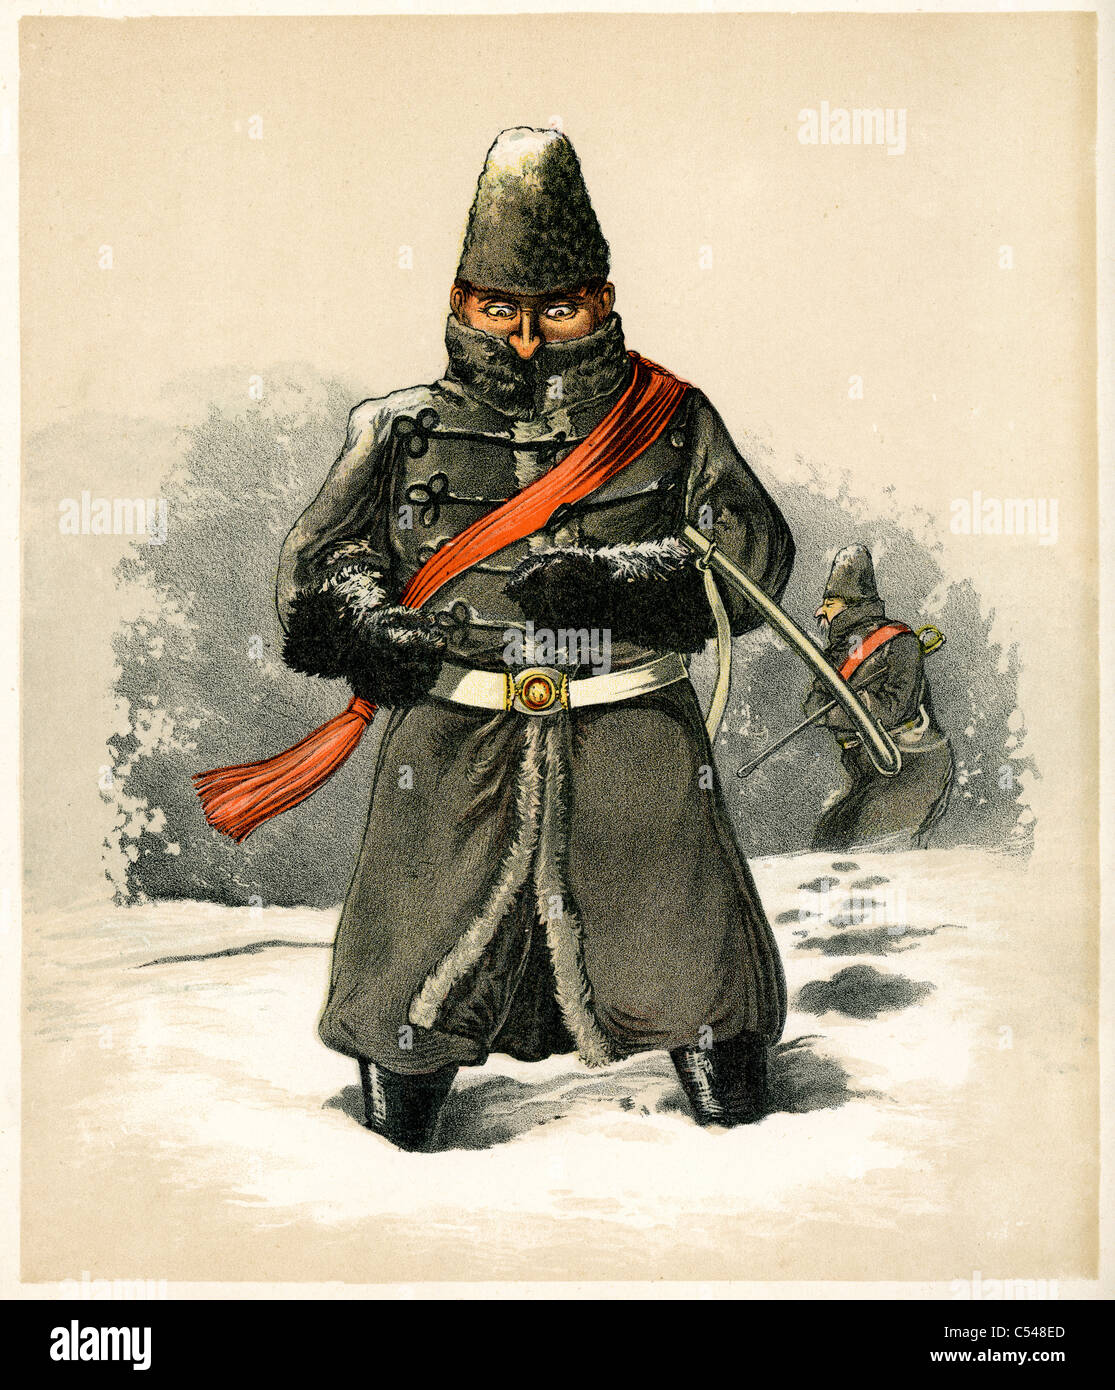 Caricature of a British Soldier in Winter Uniform from the Victorian period Stock Photo